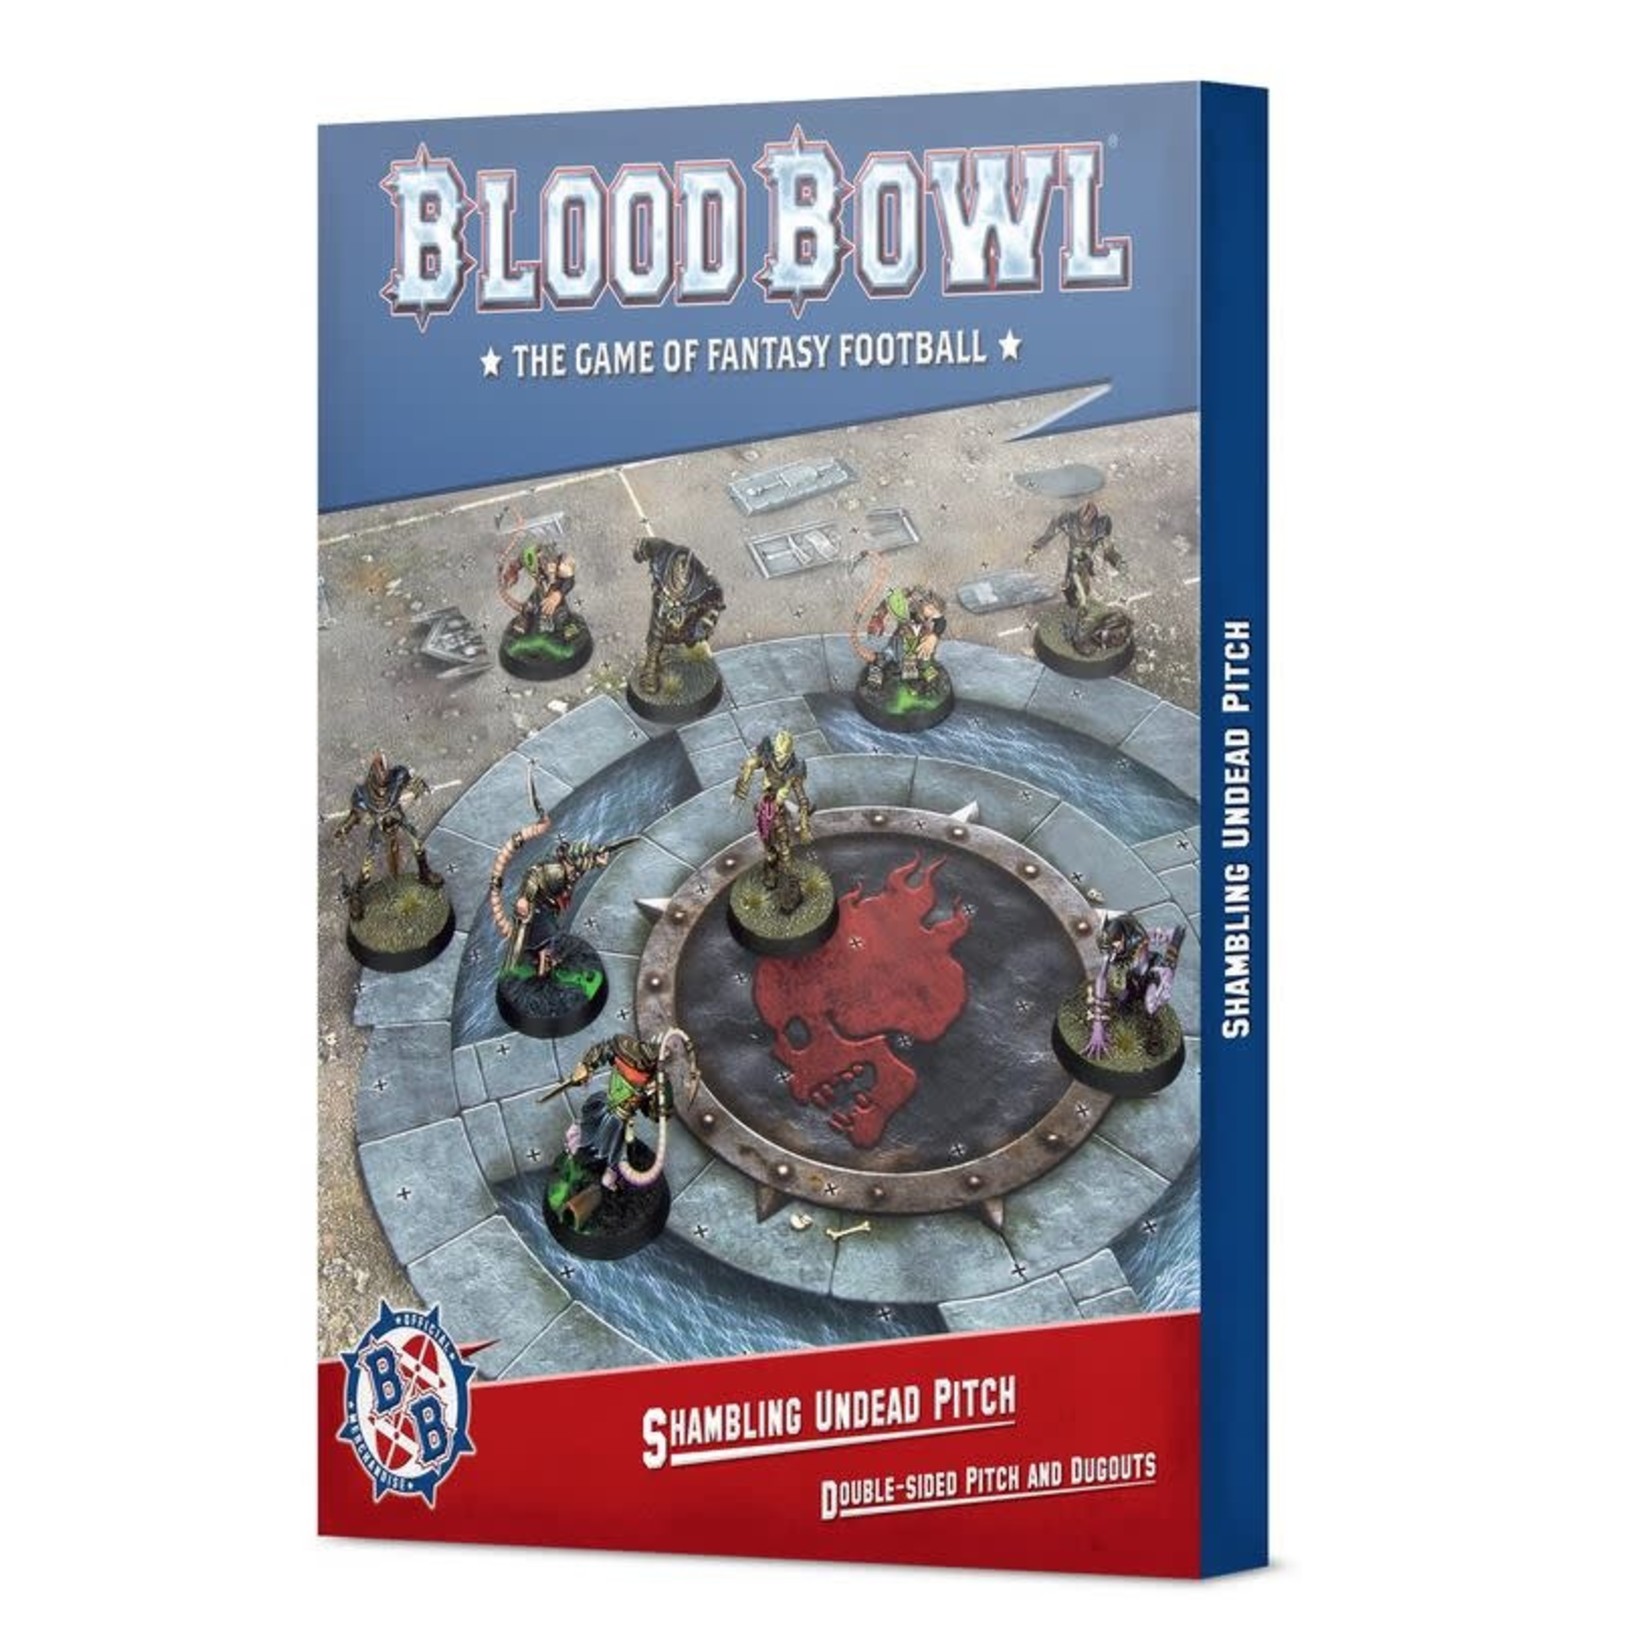 Blood Bowl: Shambling Undead Pitch - Double sided Pitch & Dugouts